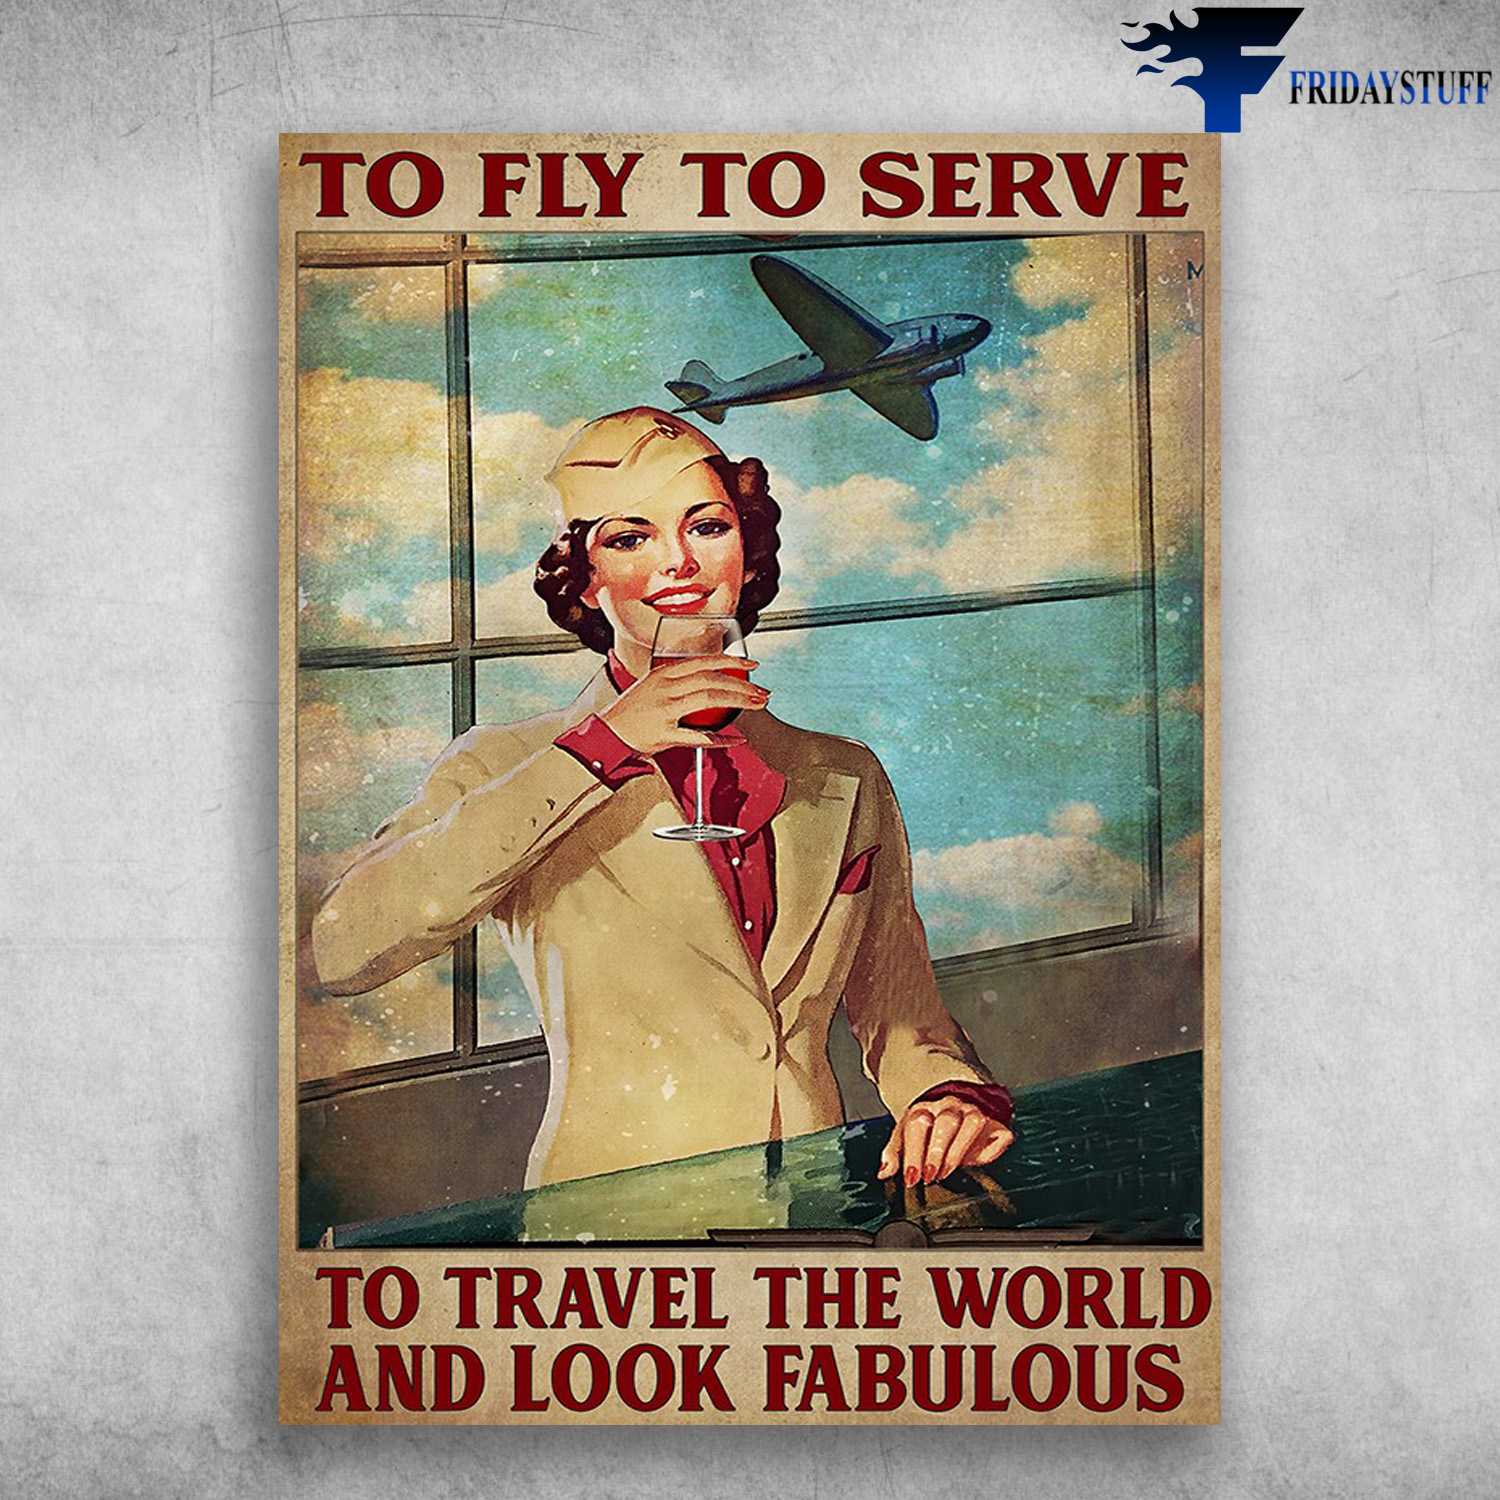 Flight Attendant - To Fly, To Serve, To Travel The World, And Look Fabulous, Drink Wine